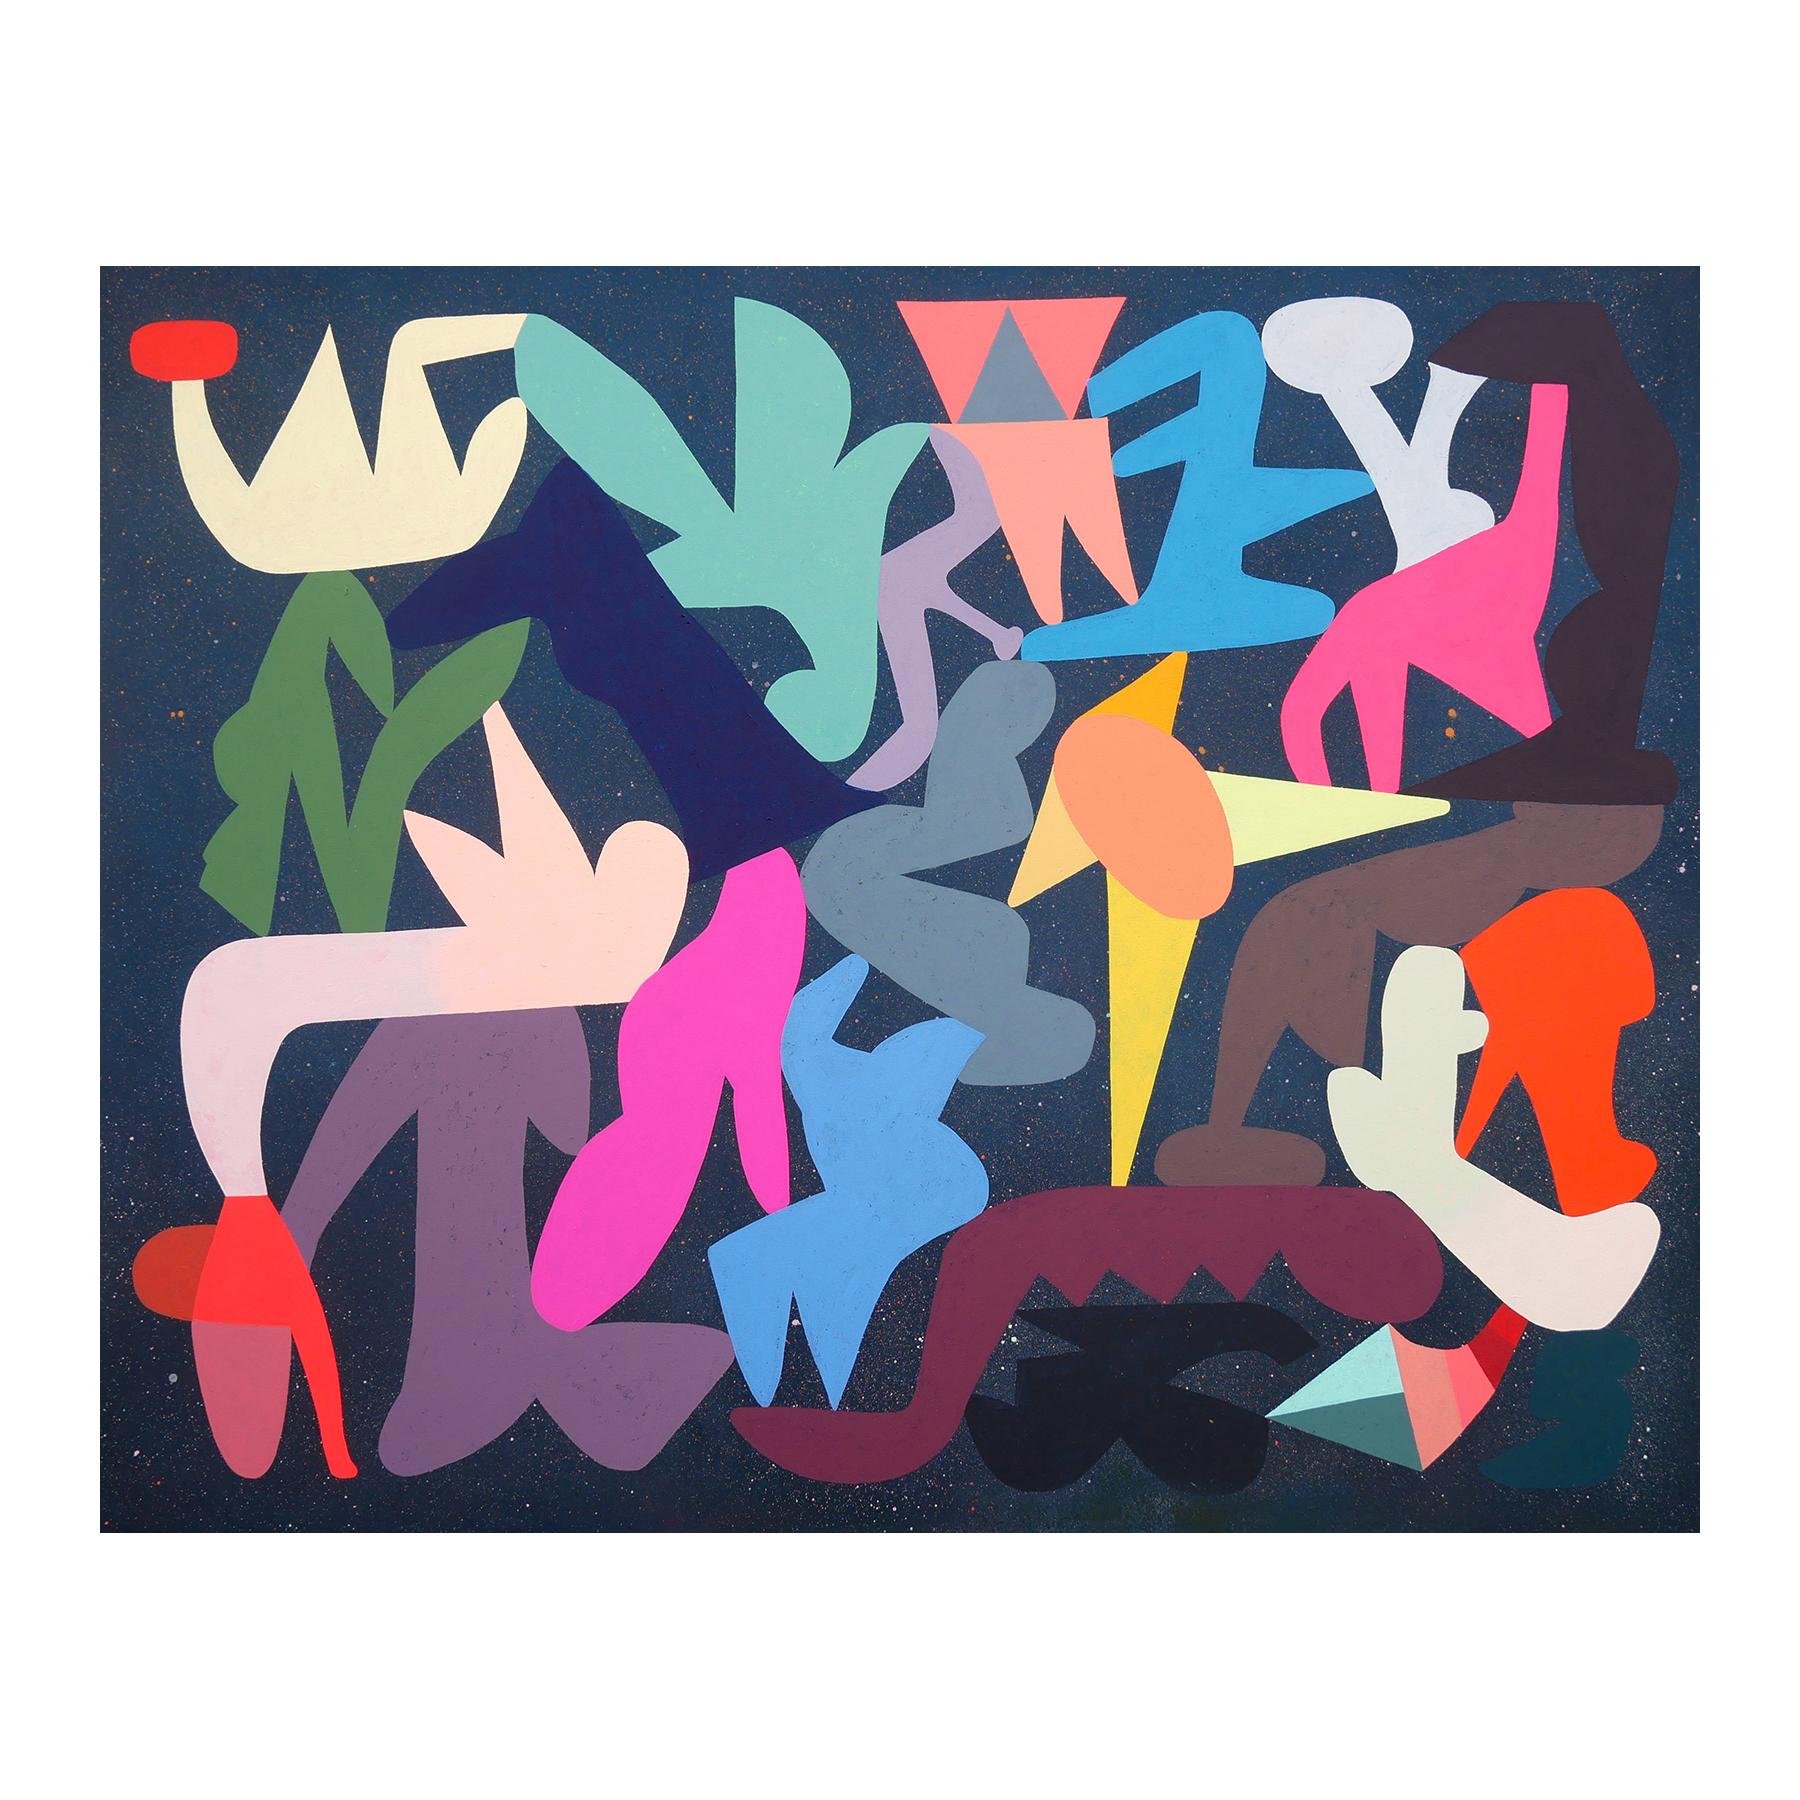 Colorful abstract painting by contemporary Houston artist Peter Healy. The work features a variety of vibrant, hard-edged shapes intertwined against a navy, speckled background. Currently unframed, but options are available. 

Artist Biography: I am